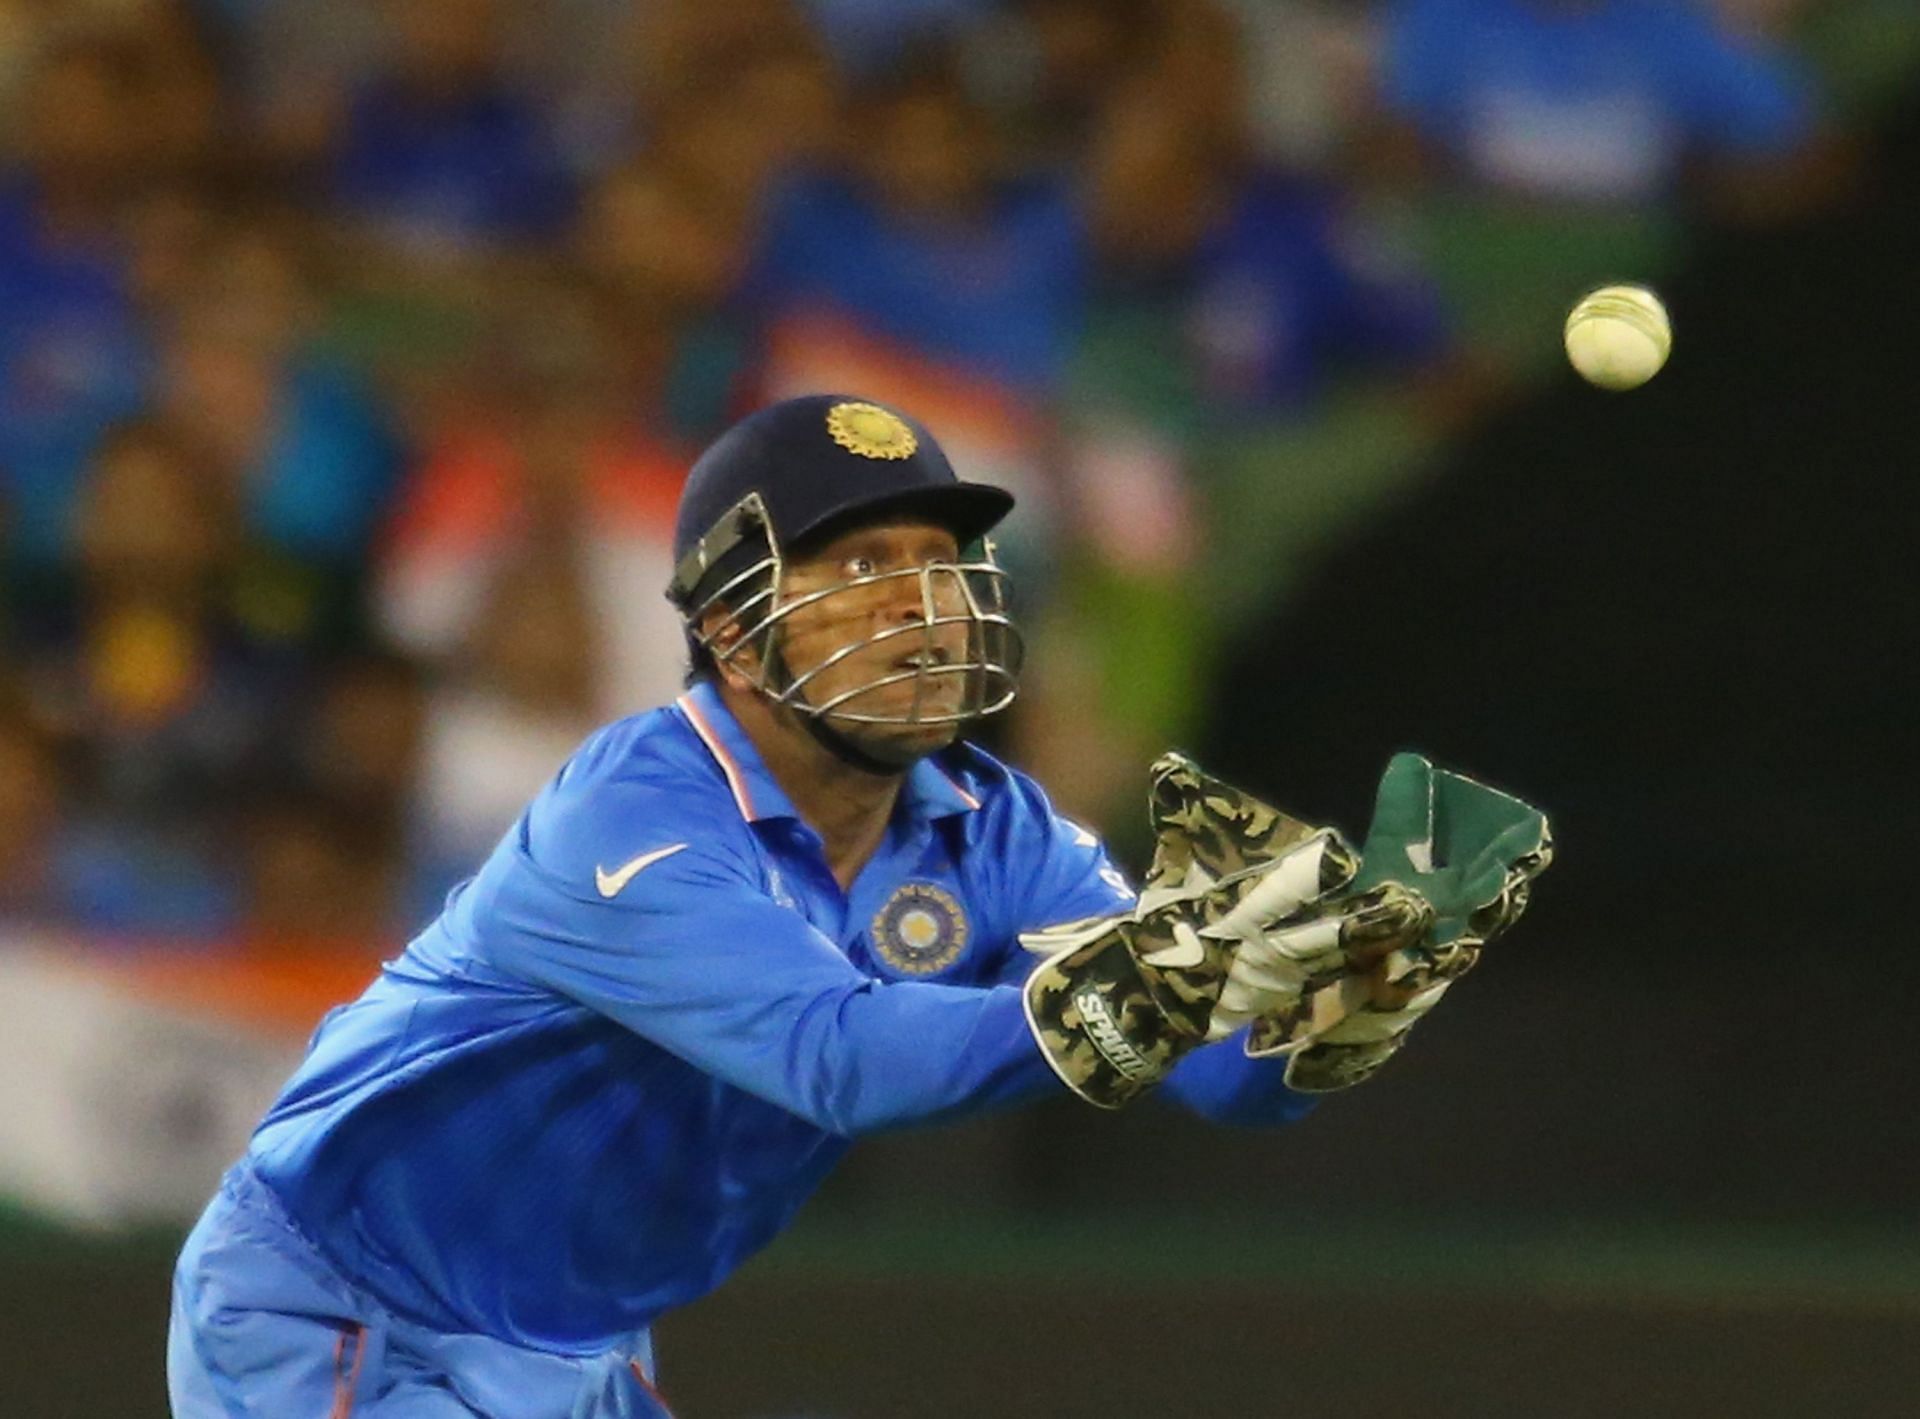 South Africa v India - 2015 ICC Cricket World Cup